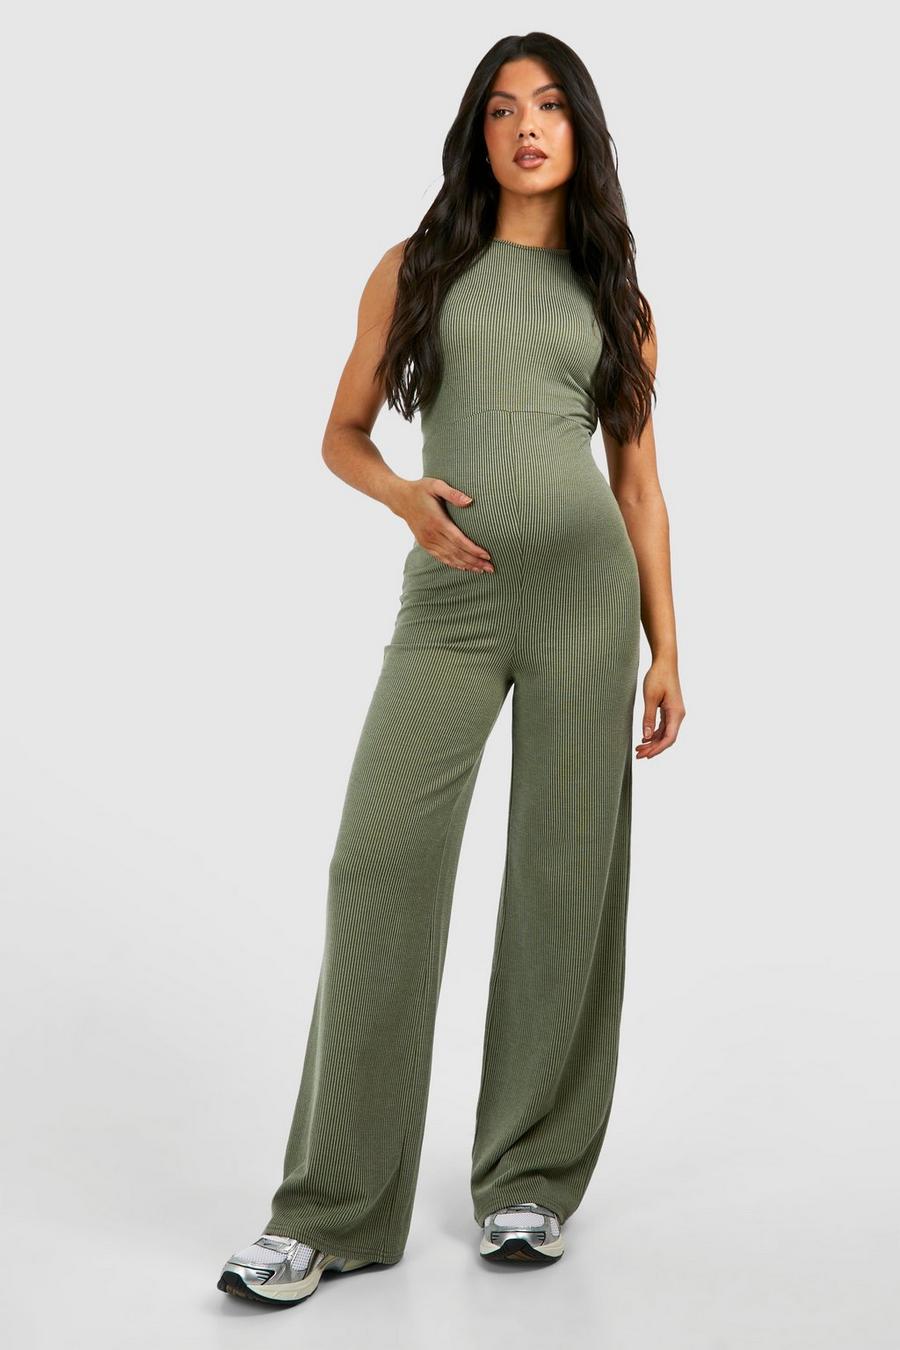  Womens Jumpsuits and Rompers Jersey Overalls for Women  Pregnancy Onesies for Women Backless Bodycon Jumpsuit Army Green :  Clothing, Shoes & Jewelry